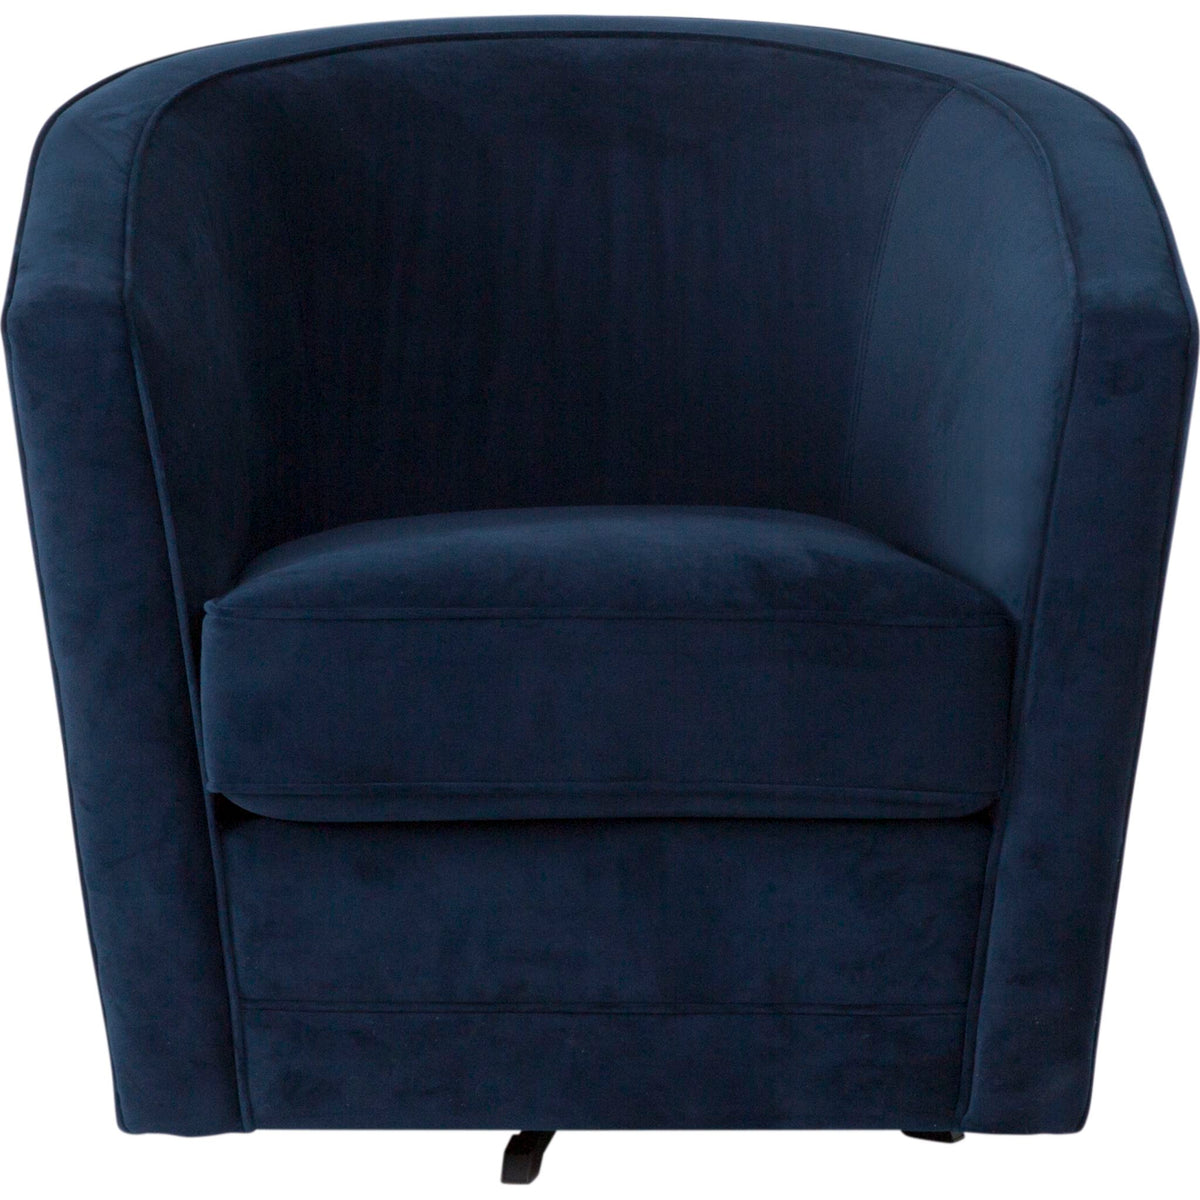 Alice Swivel Chair - Navy | Dufresne Furniture and Appliances